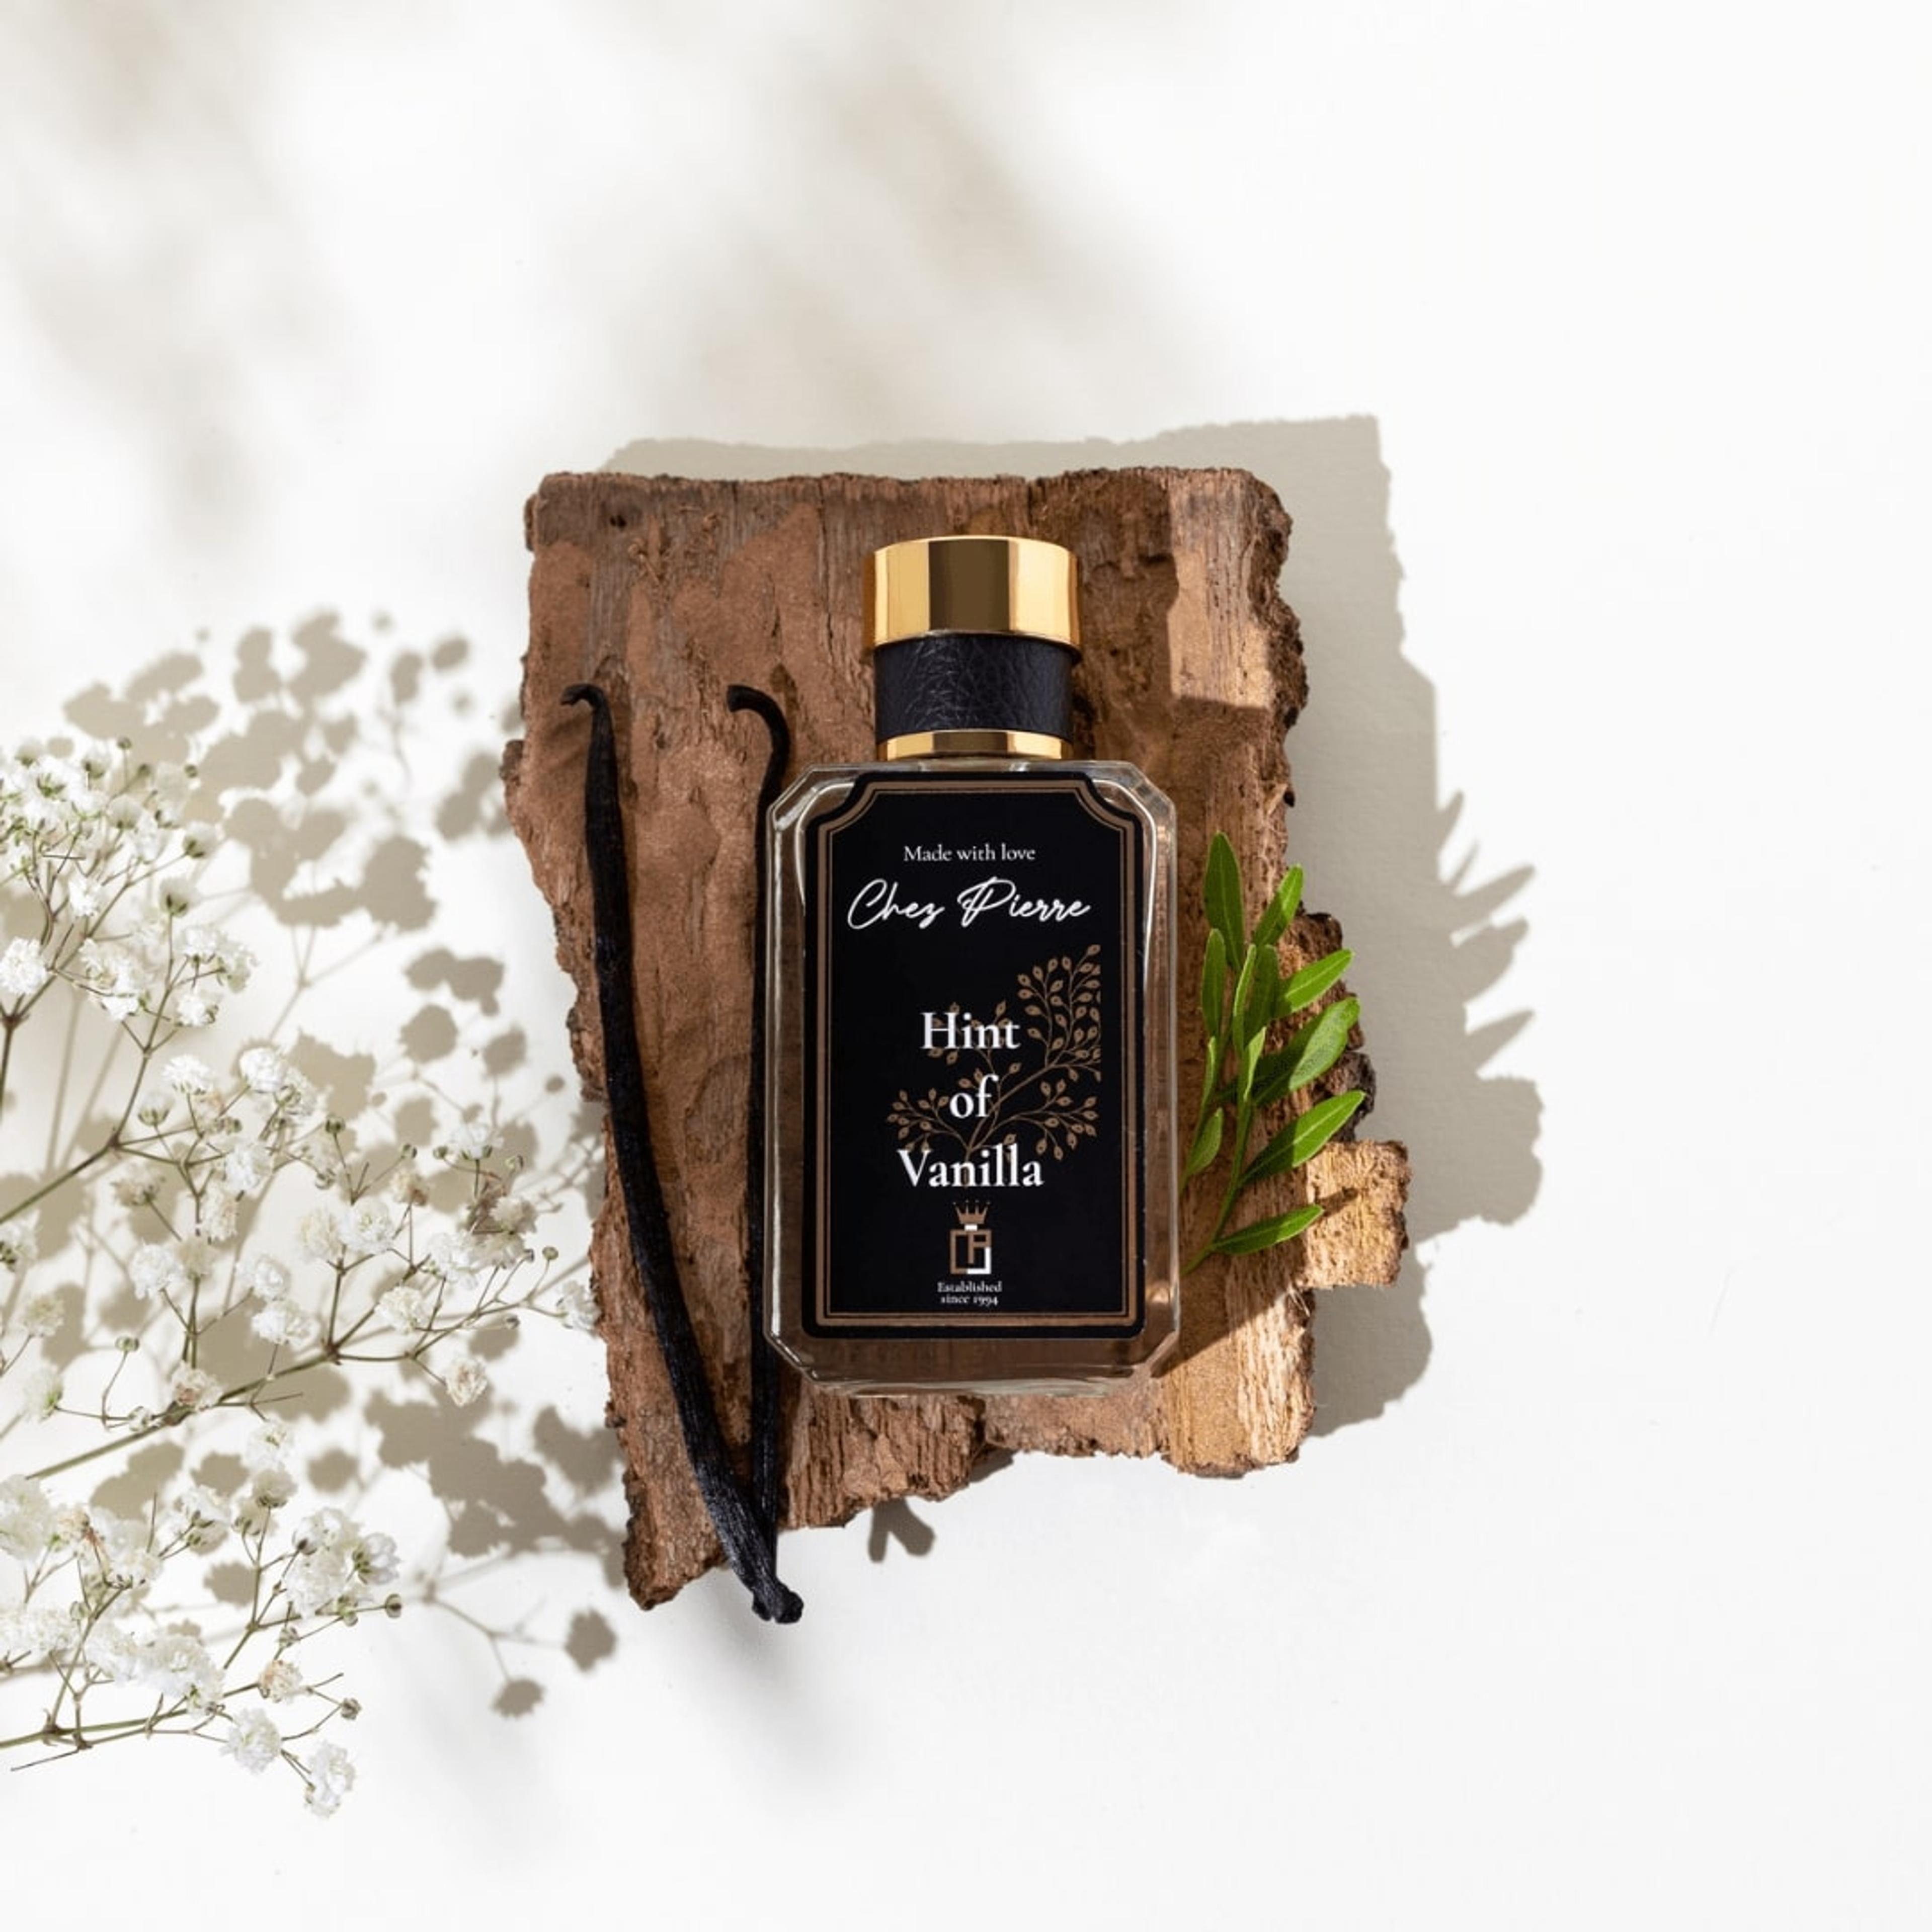 Chez Pierre's Hint of Vanilla Perfume Inspired By Tobacco Vanille